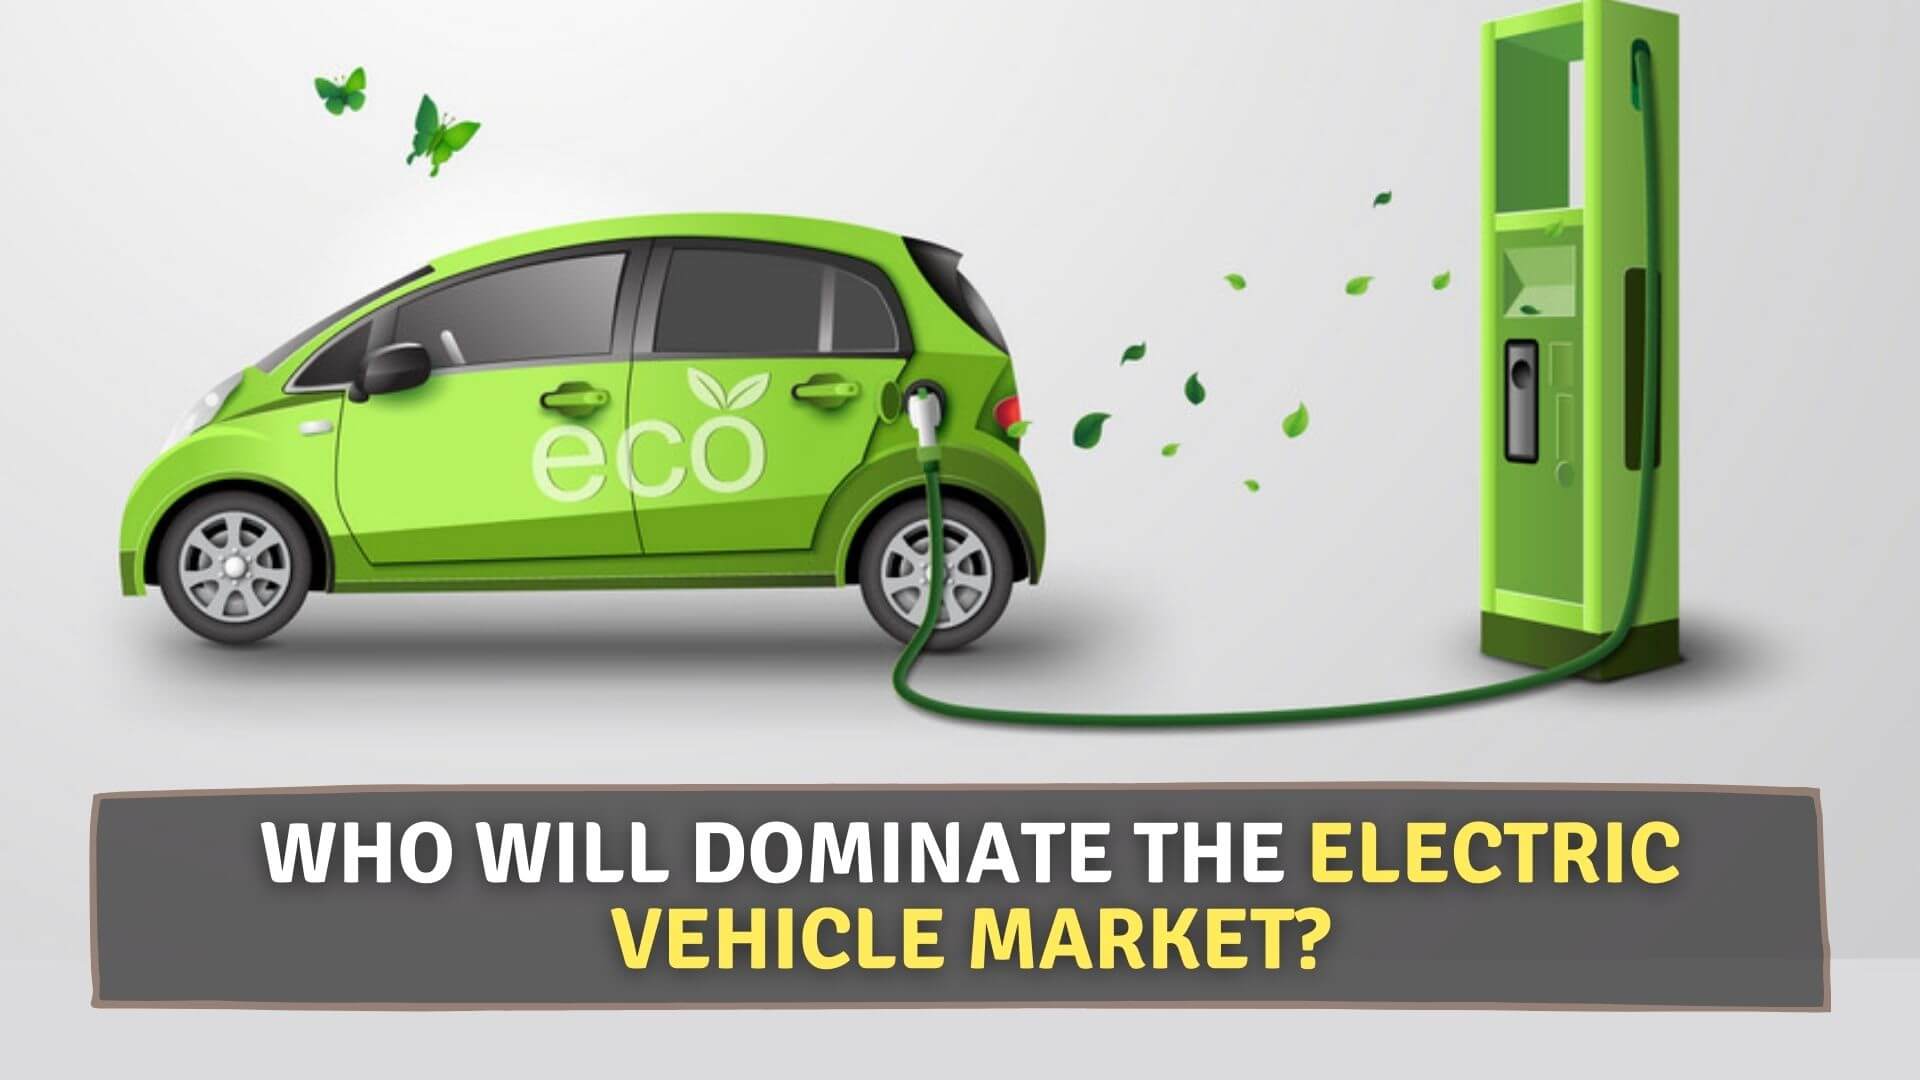 https://e-vehicleinfo.com/oats-vs-bet-who-will-dominate-the-electric-vehicle-market/